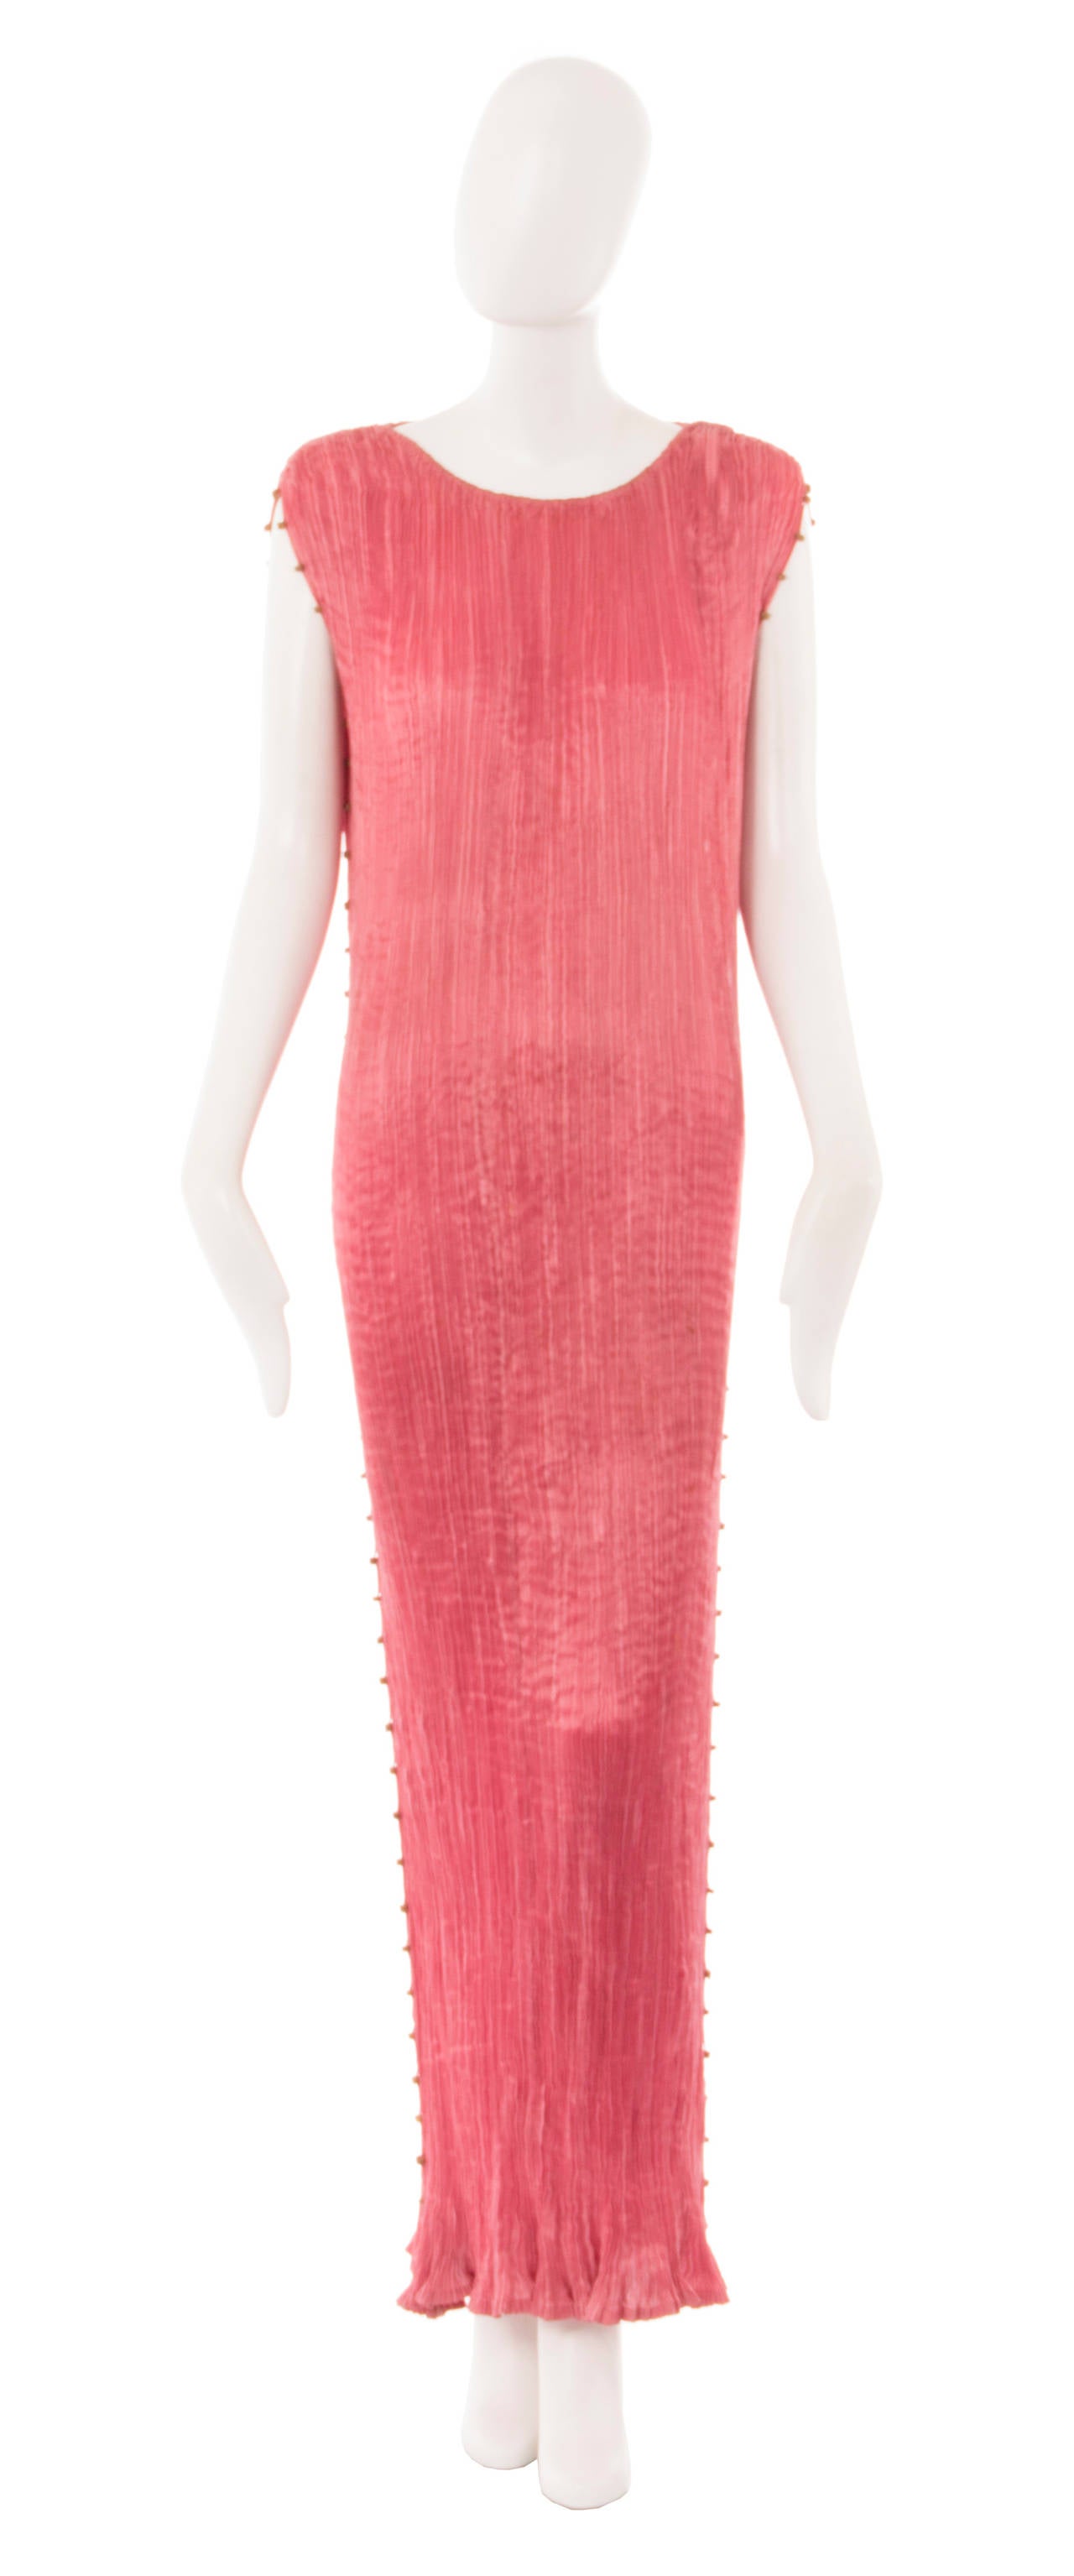 A Mariano Fortuny 'Delphos' dress, circa 1915 For Sale 1